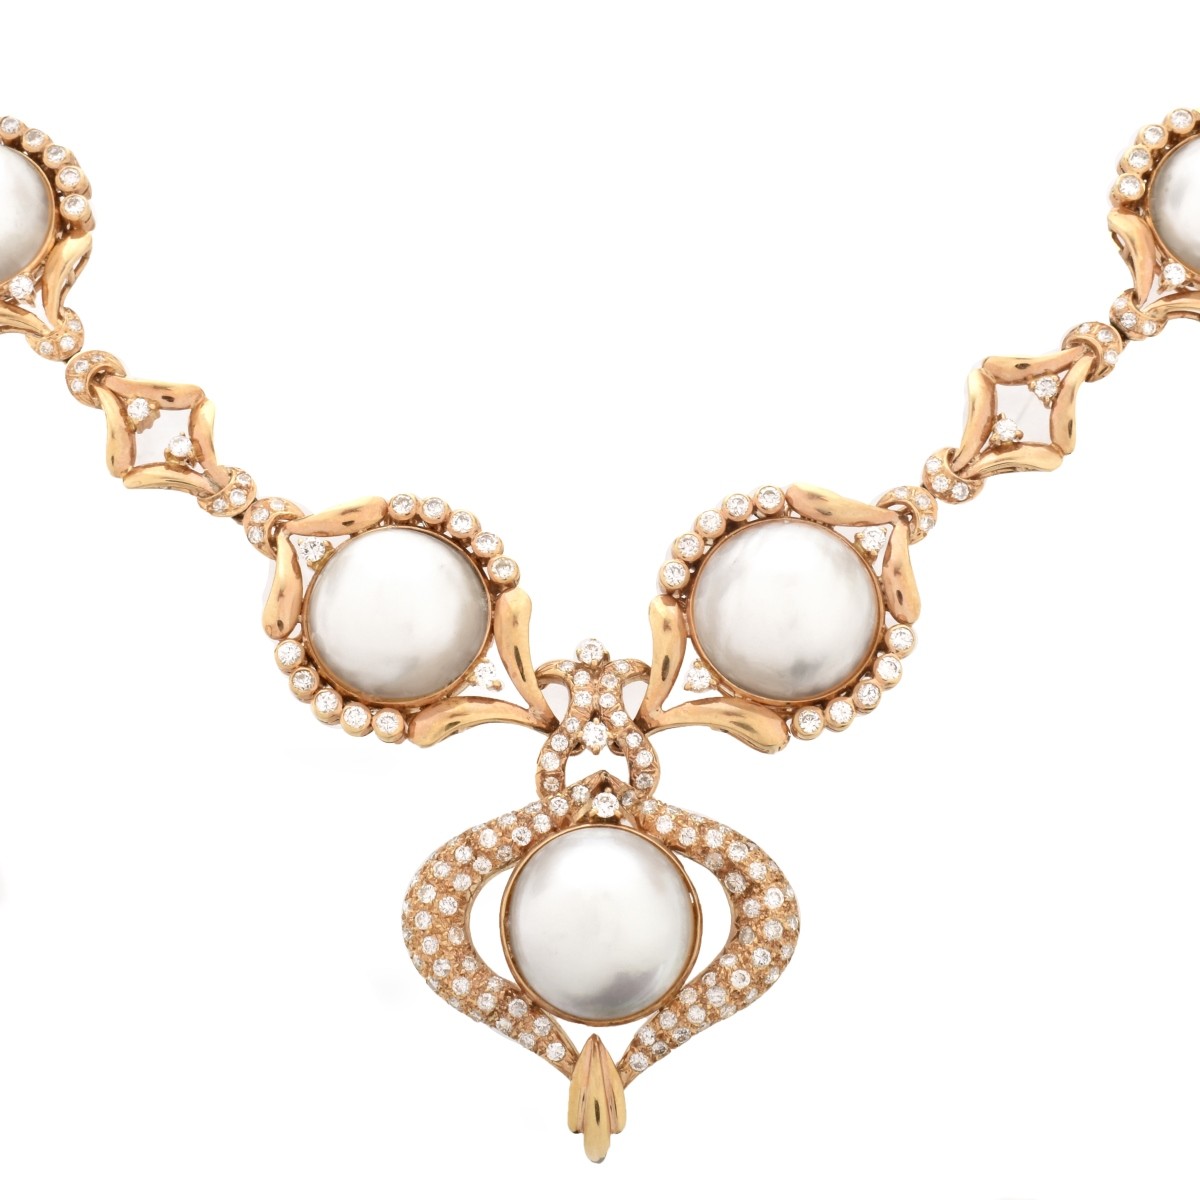 Diamond, Pearl and 14K Necklace